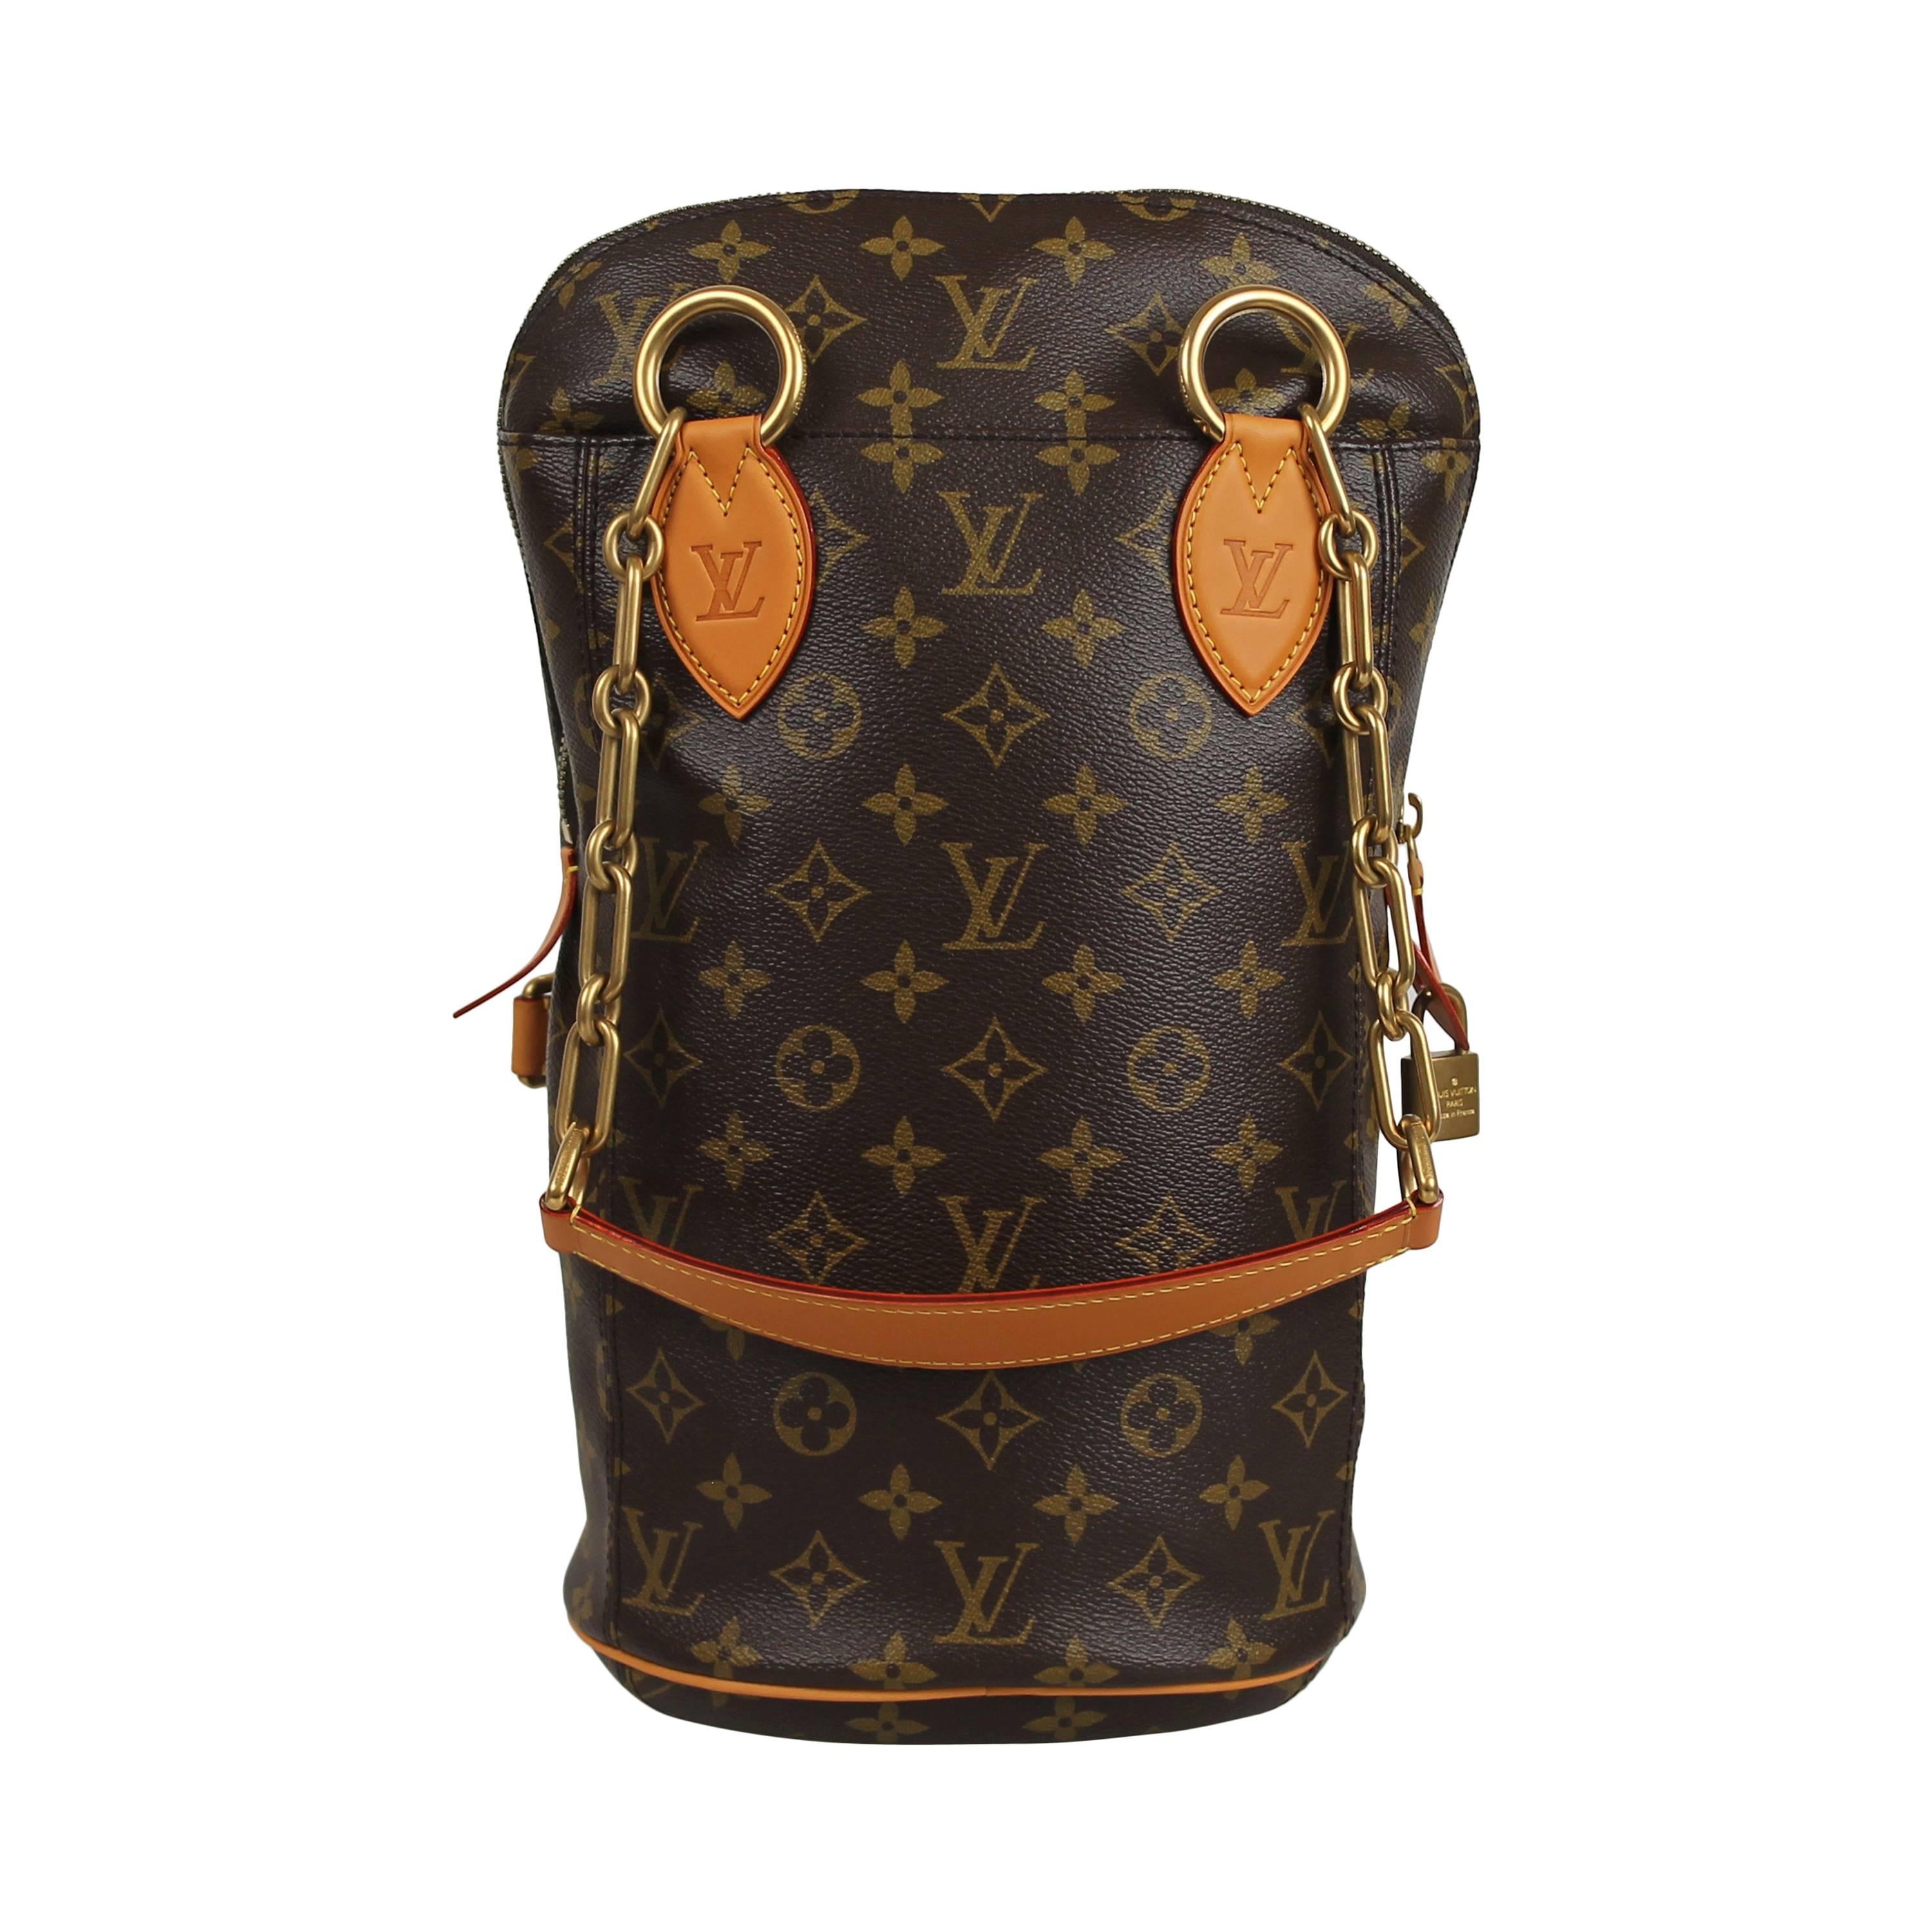 Karl Lagerfeld Louis Vuitton Boxing - For Sale on 1stDibs